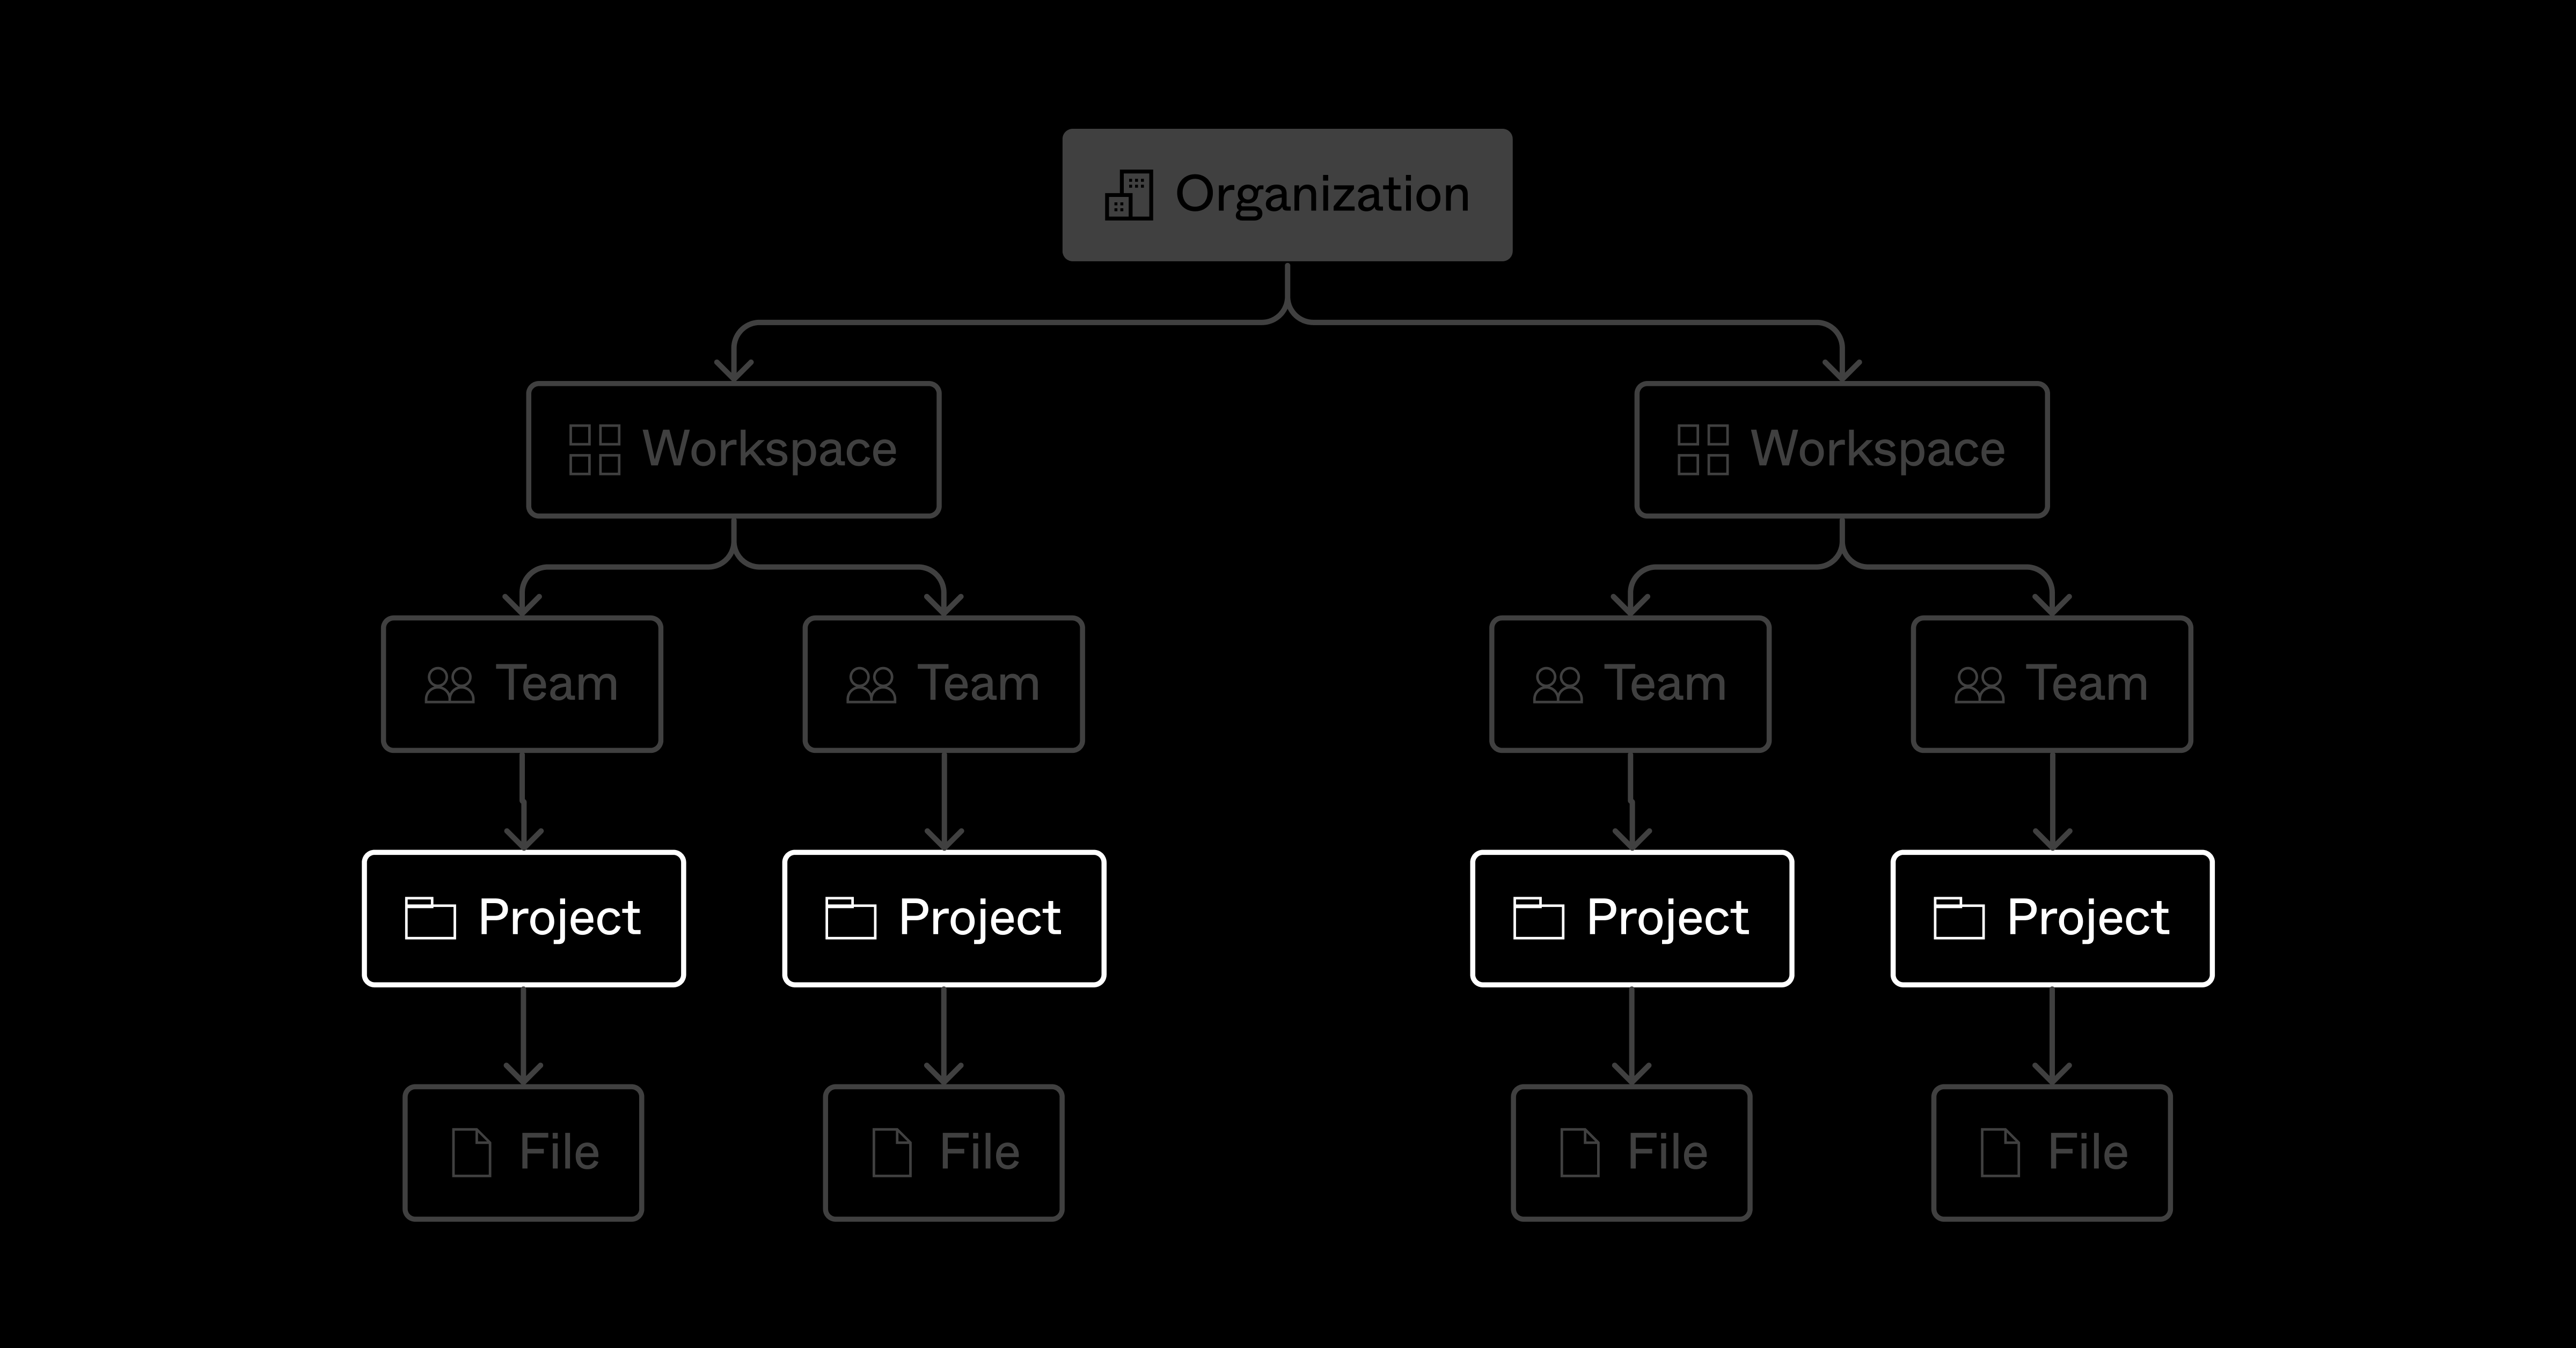 A visual representation of the Figma organizational structure. From top to bottom, the labels read "Organization," "Workspace," "Team," "Project," "File." Everything apart from "Project" is transparent, bringing "Project" into prominence.